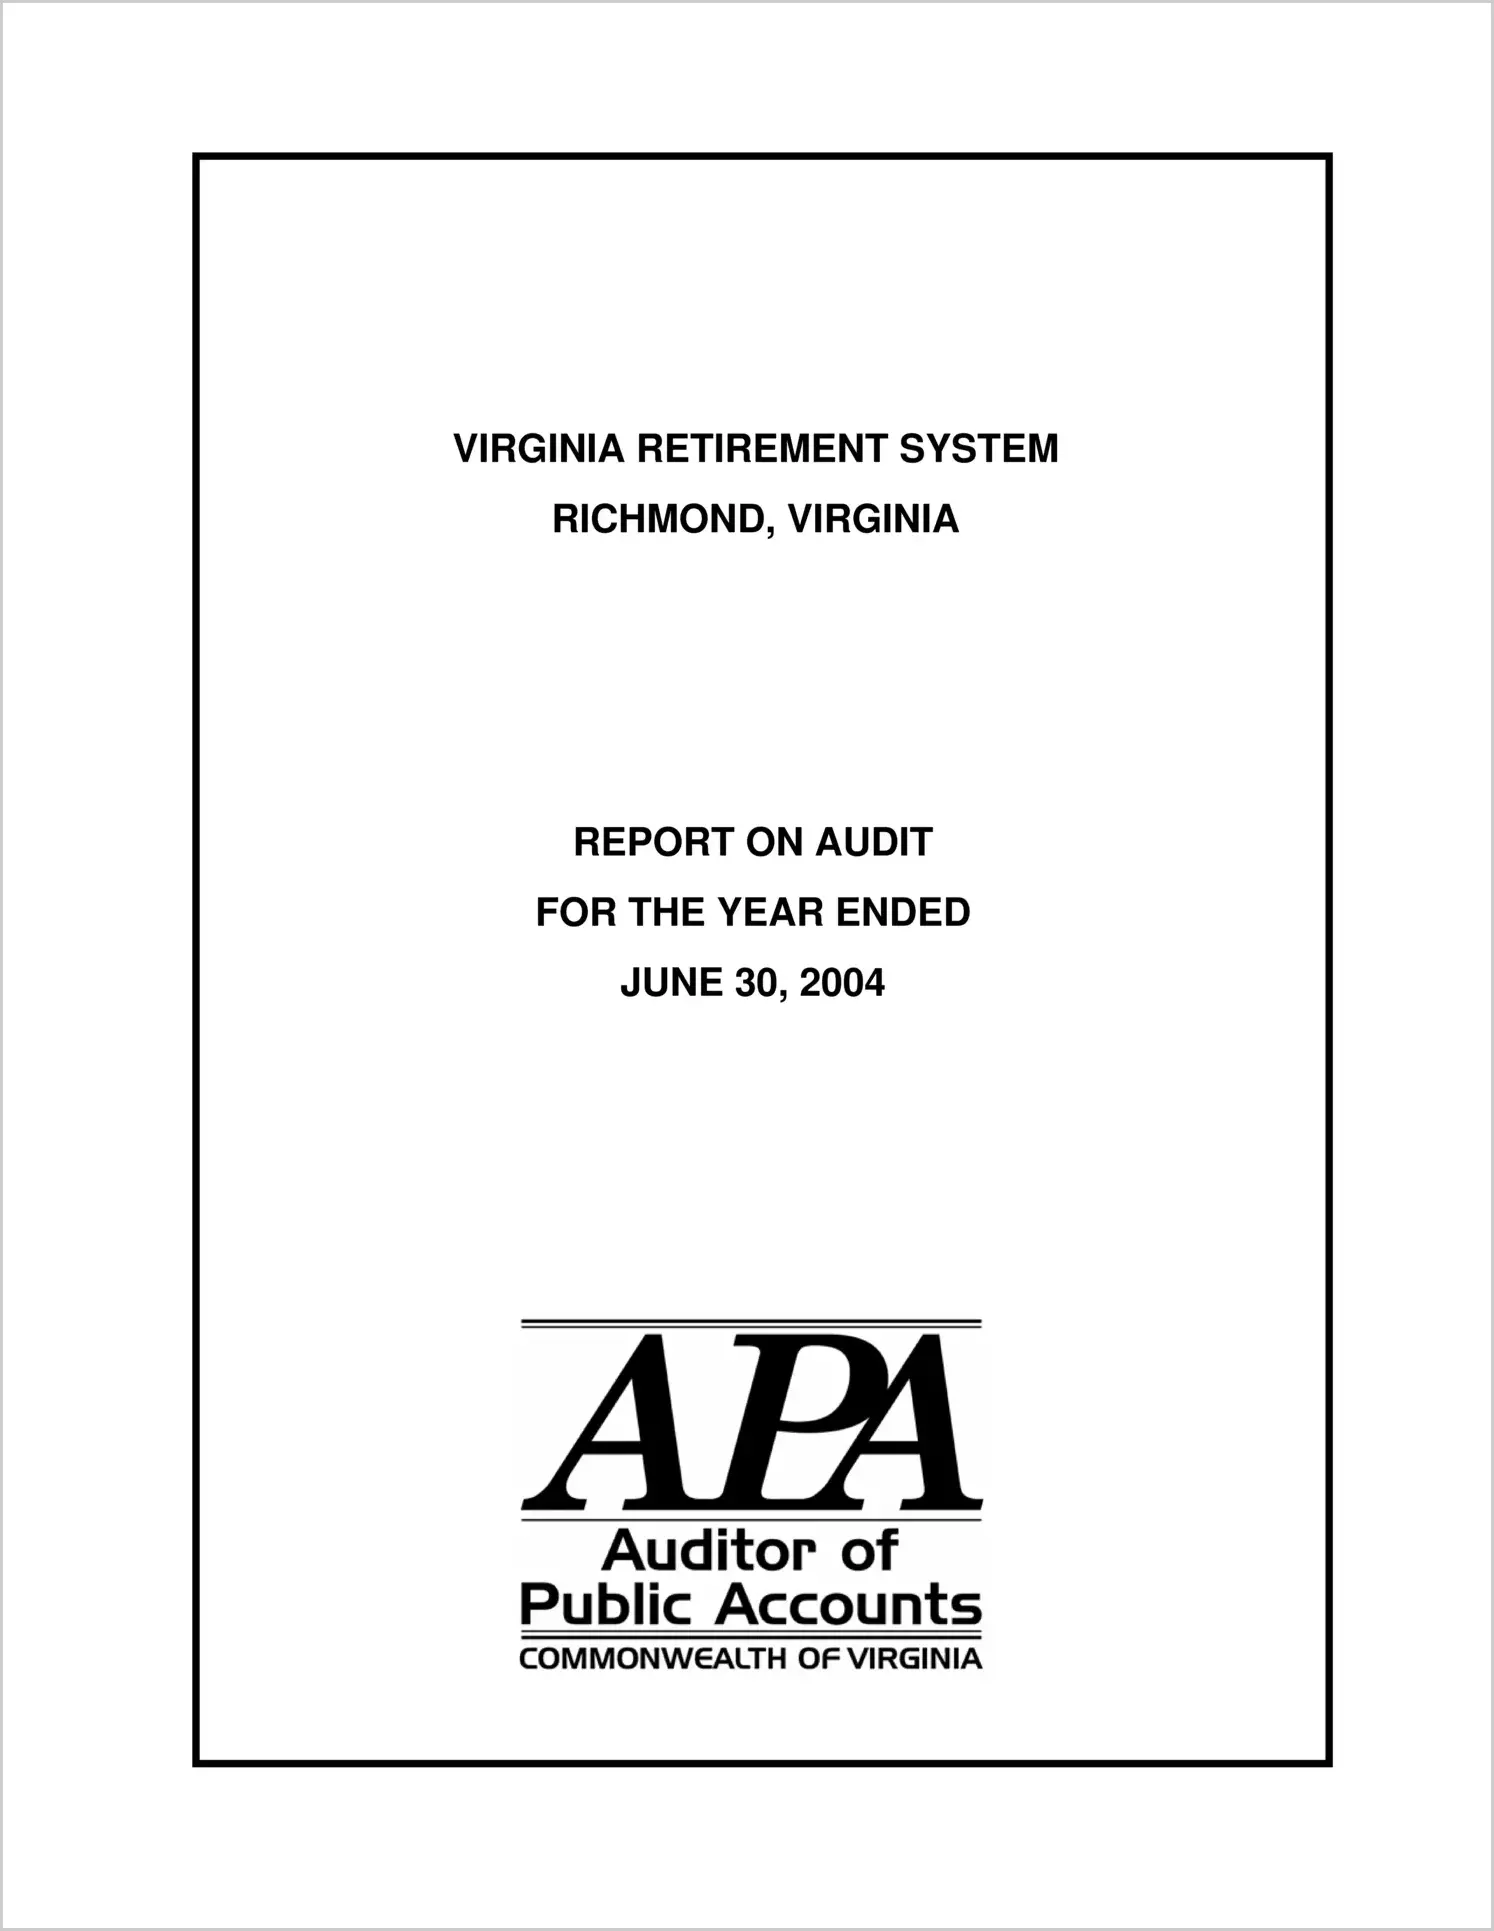 Virginia Retirement System for the year ended June 30, 2004